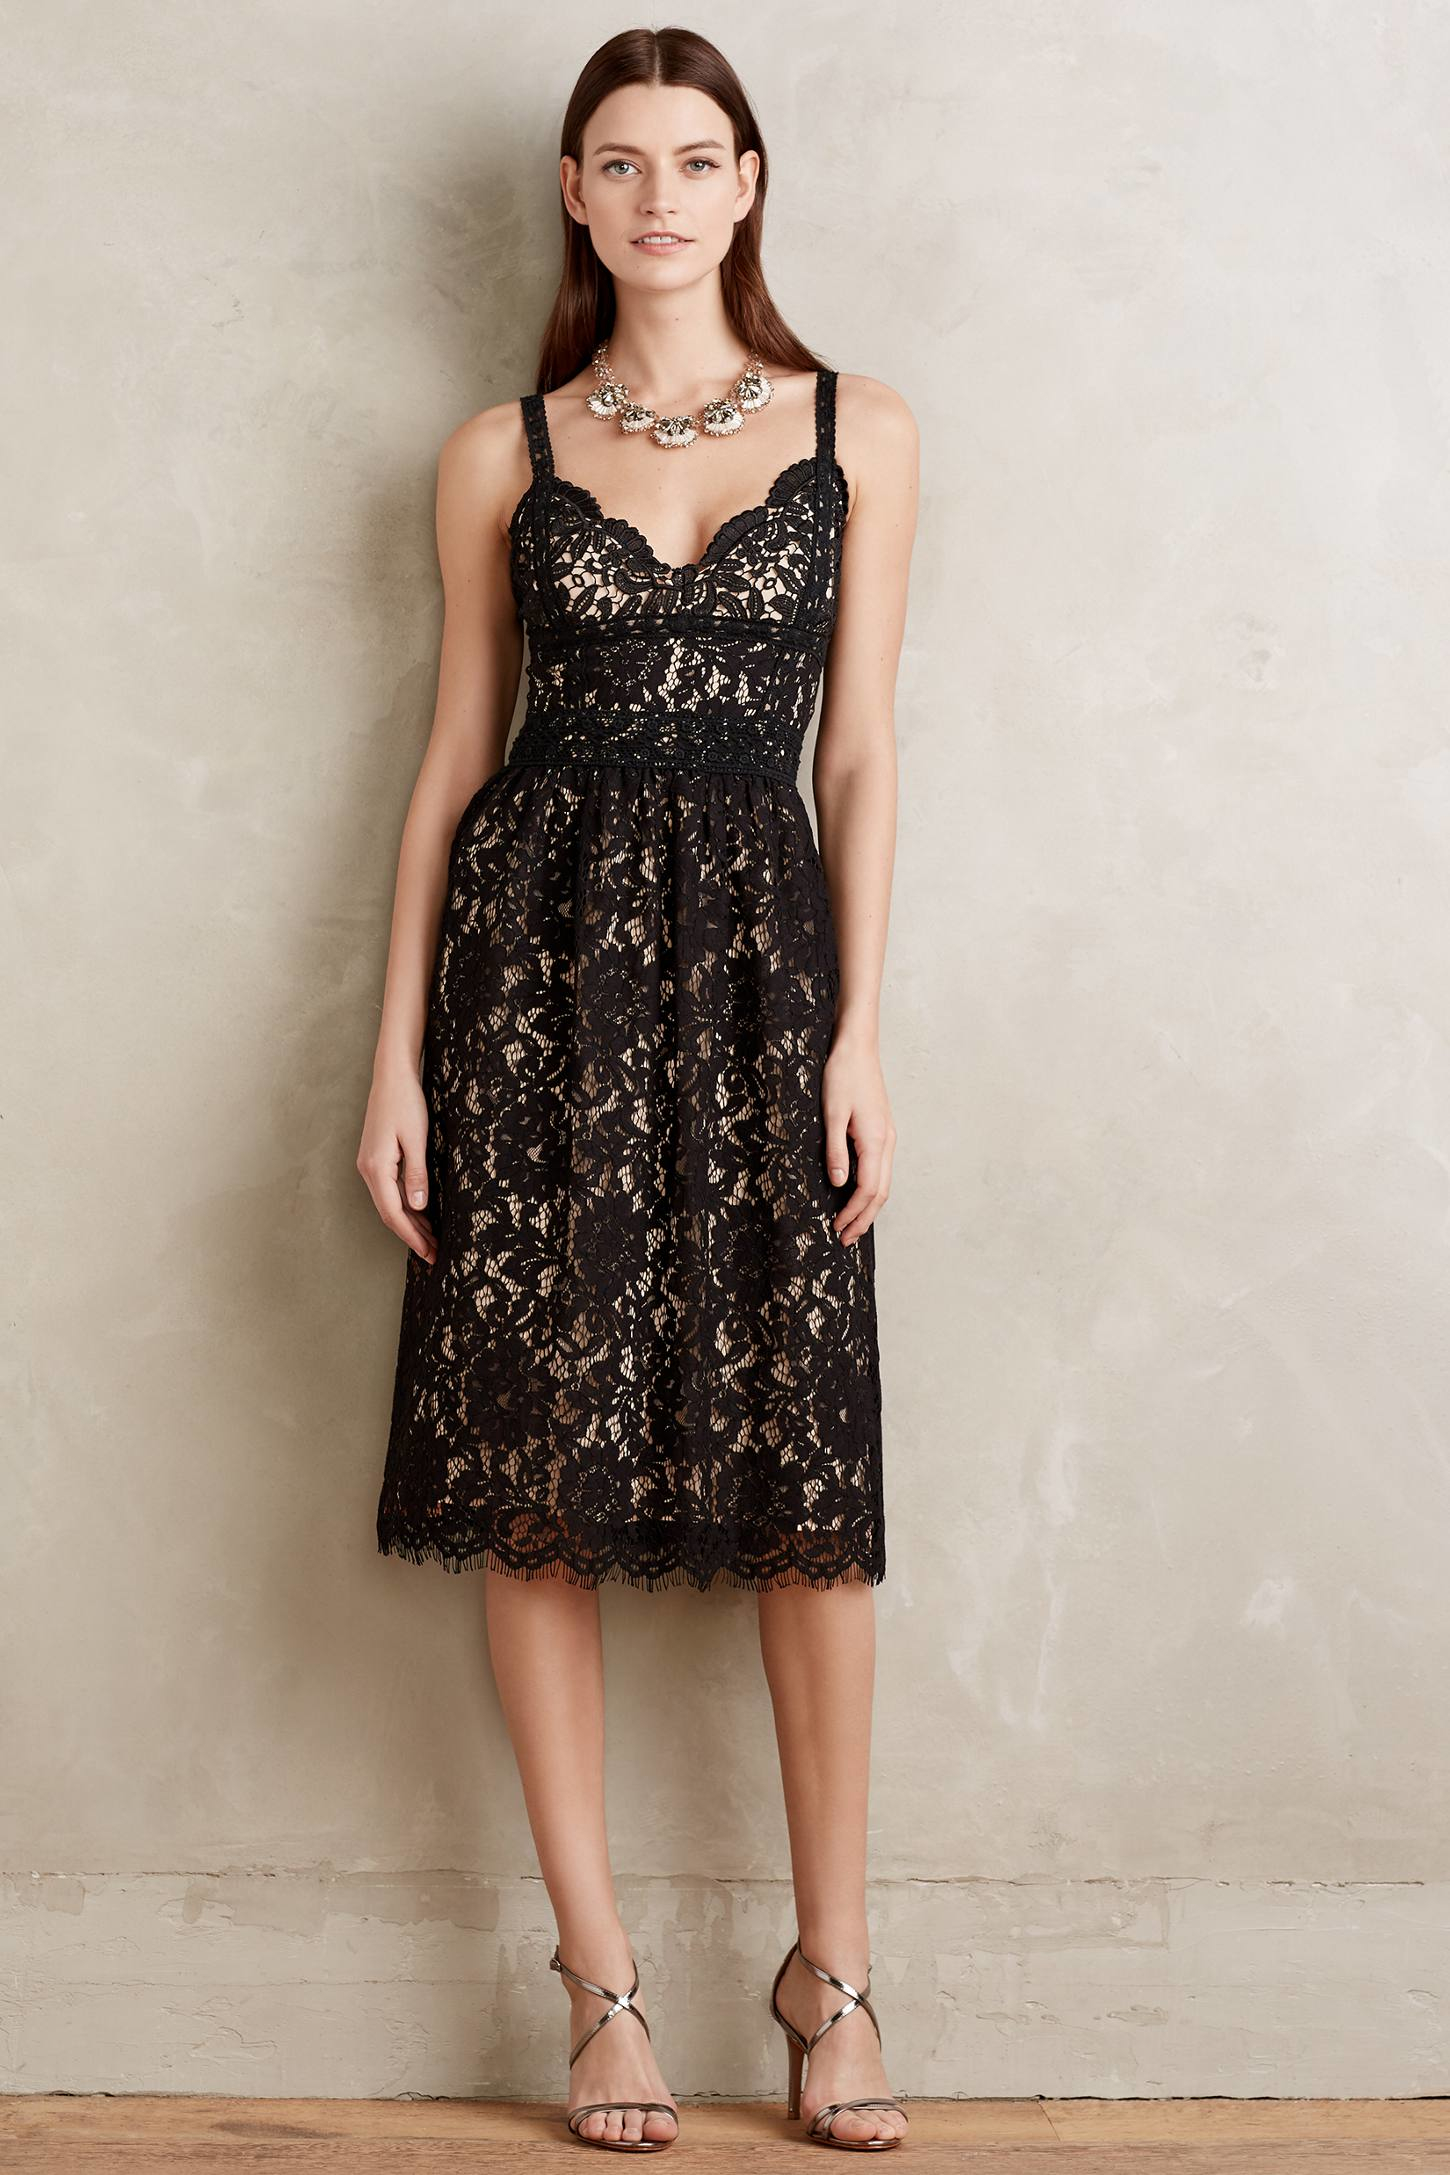 Hd In Paris Black Narrante Lace Dress Product 1 883376208 Normal 